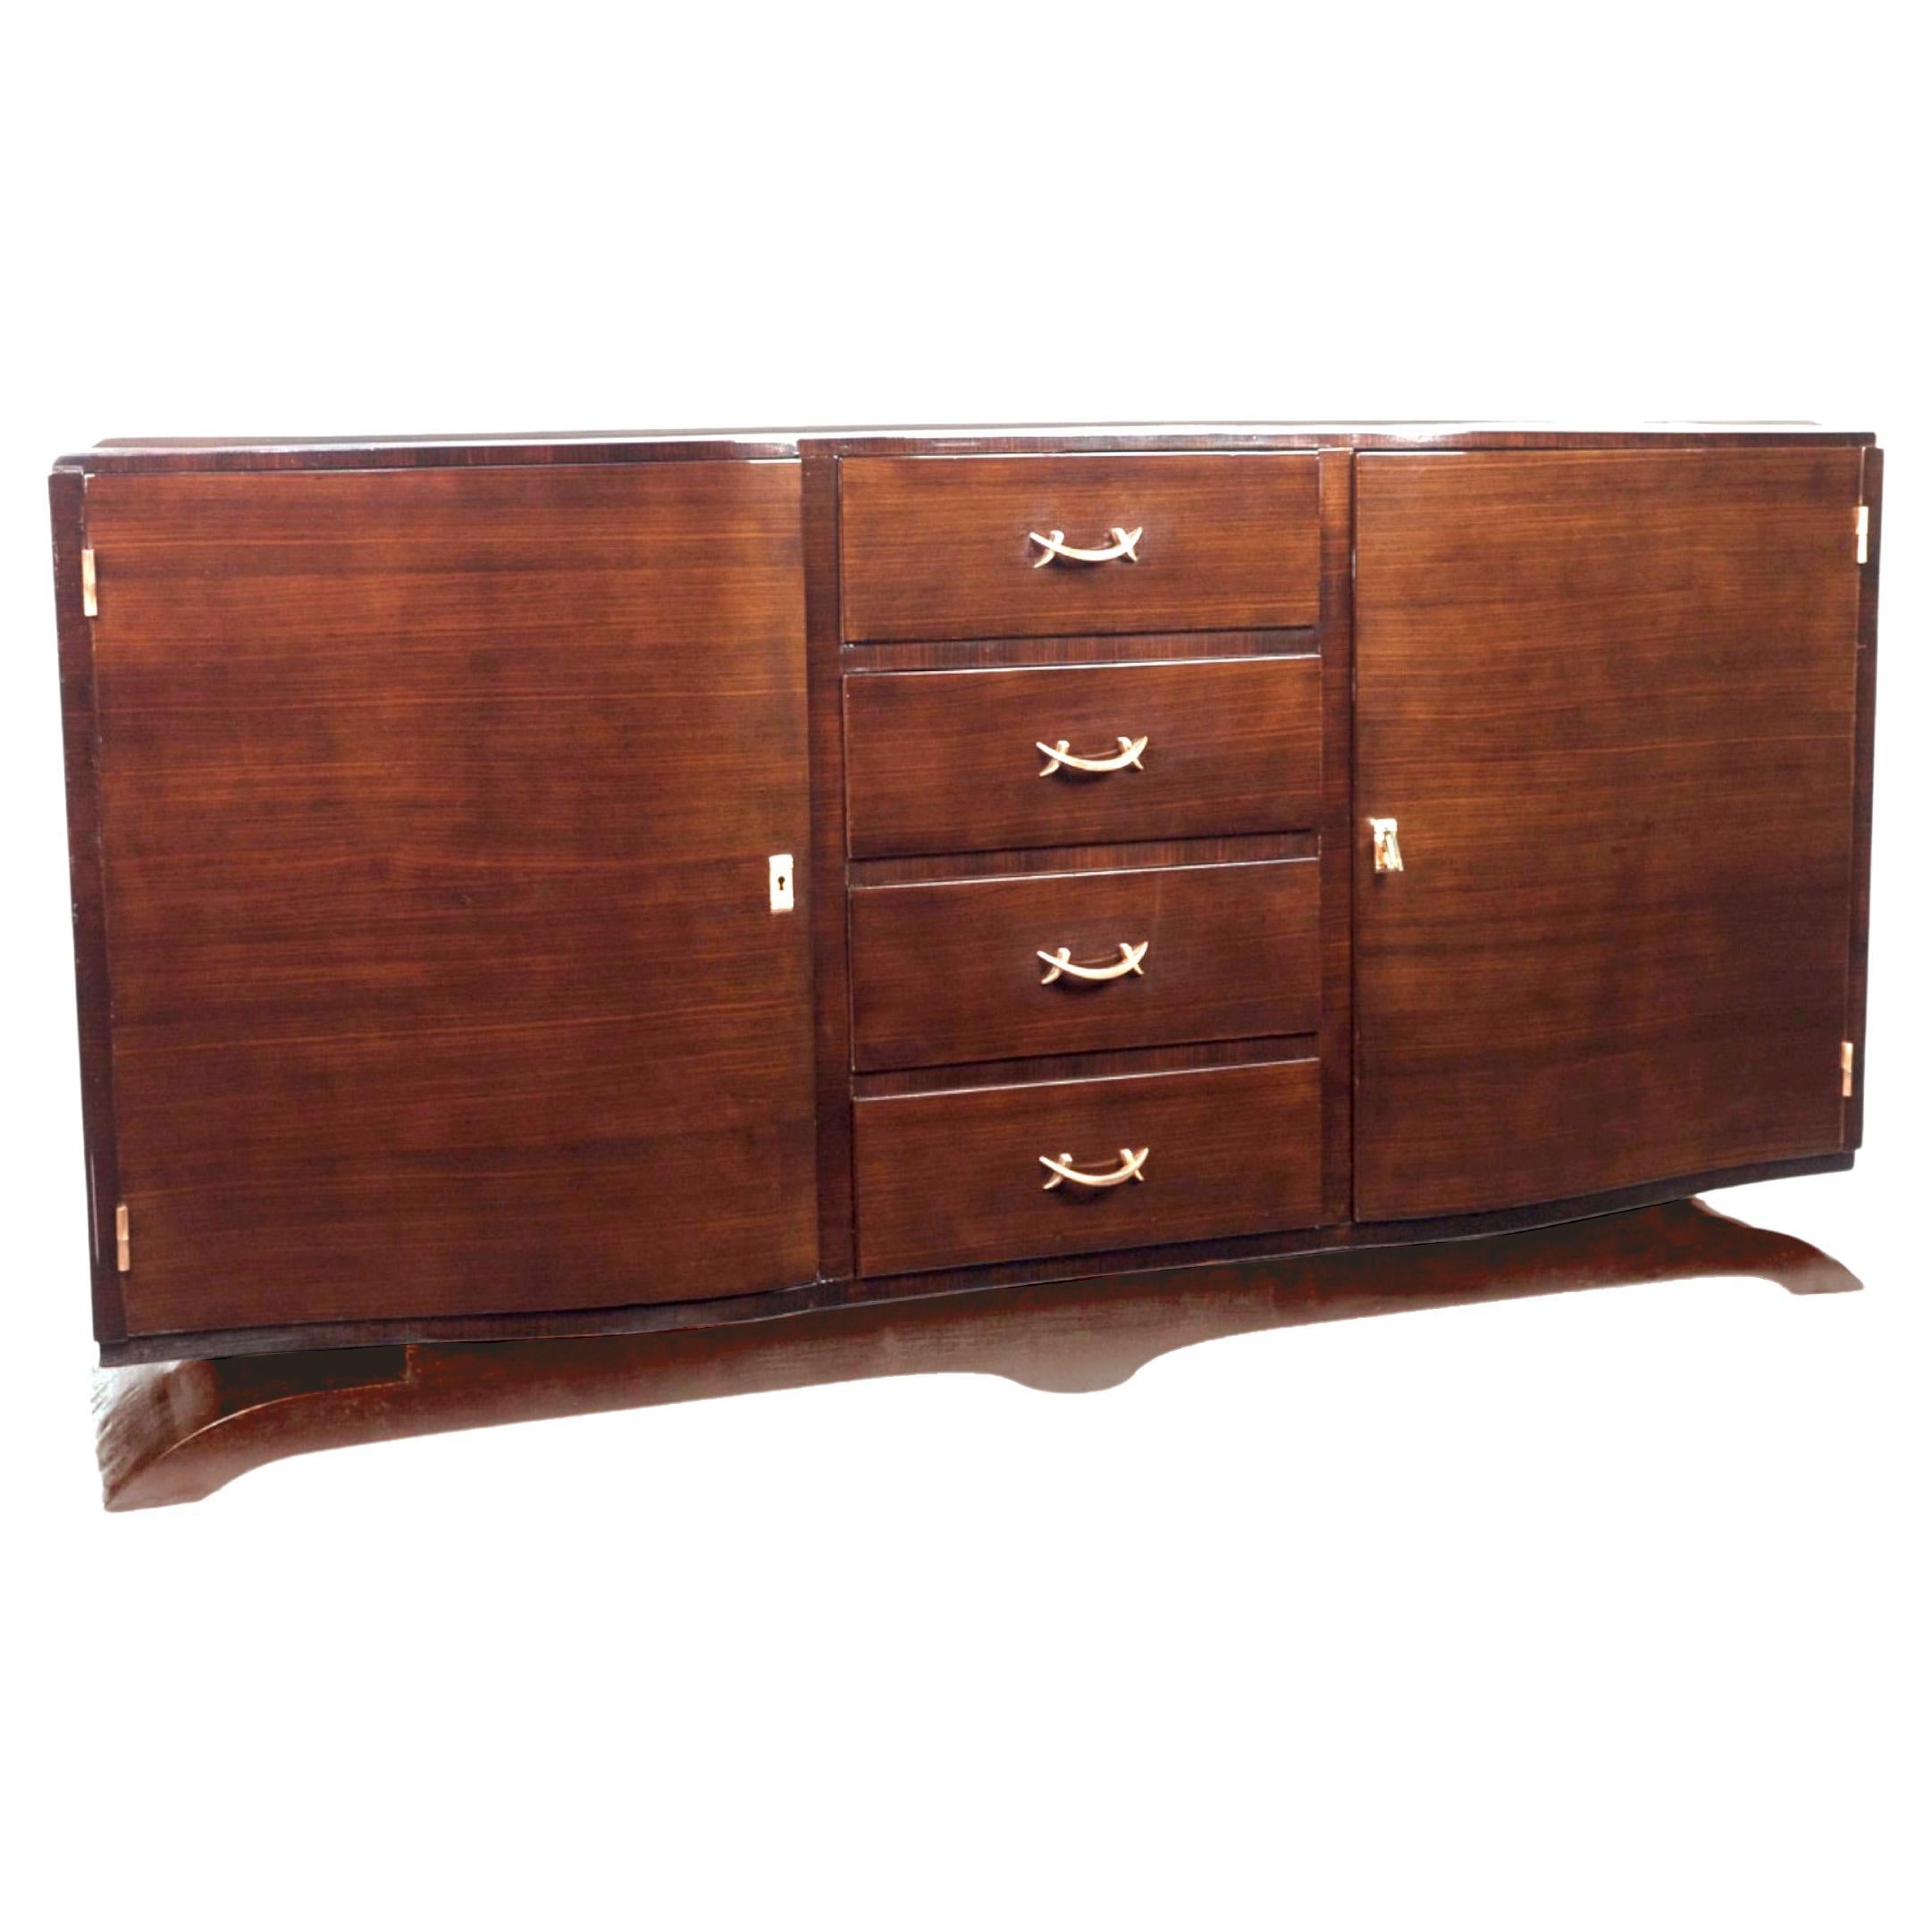 1940s Art Deco Copper Plated Sideboard For Sale